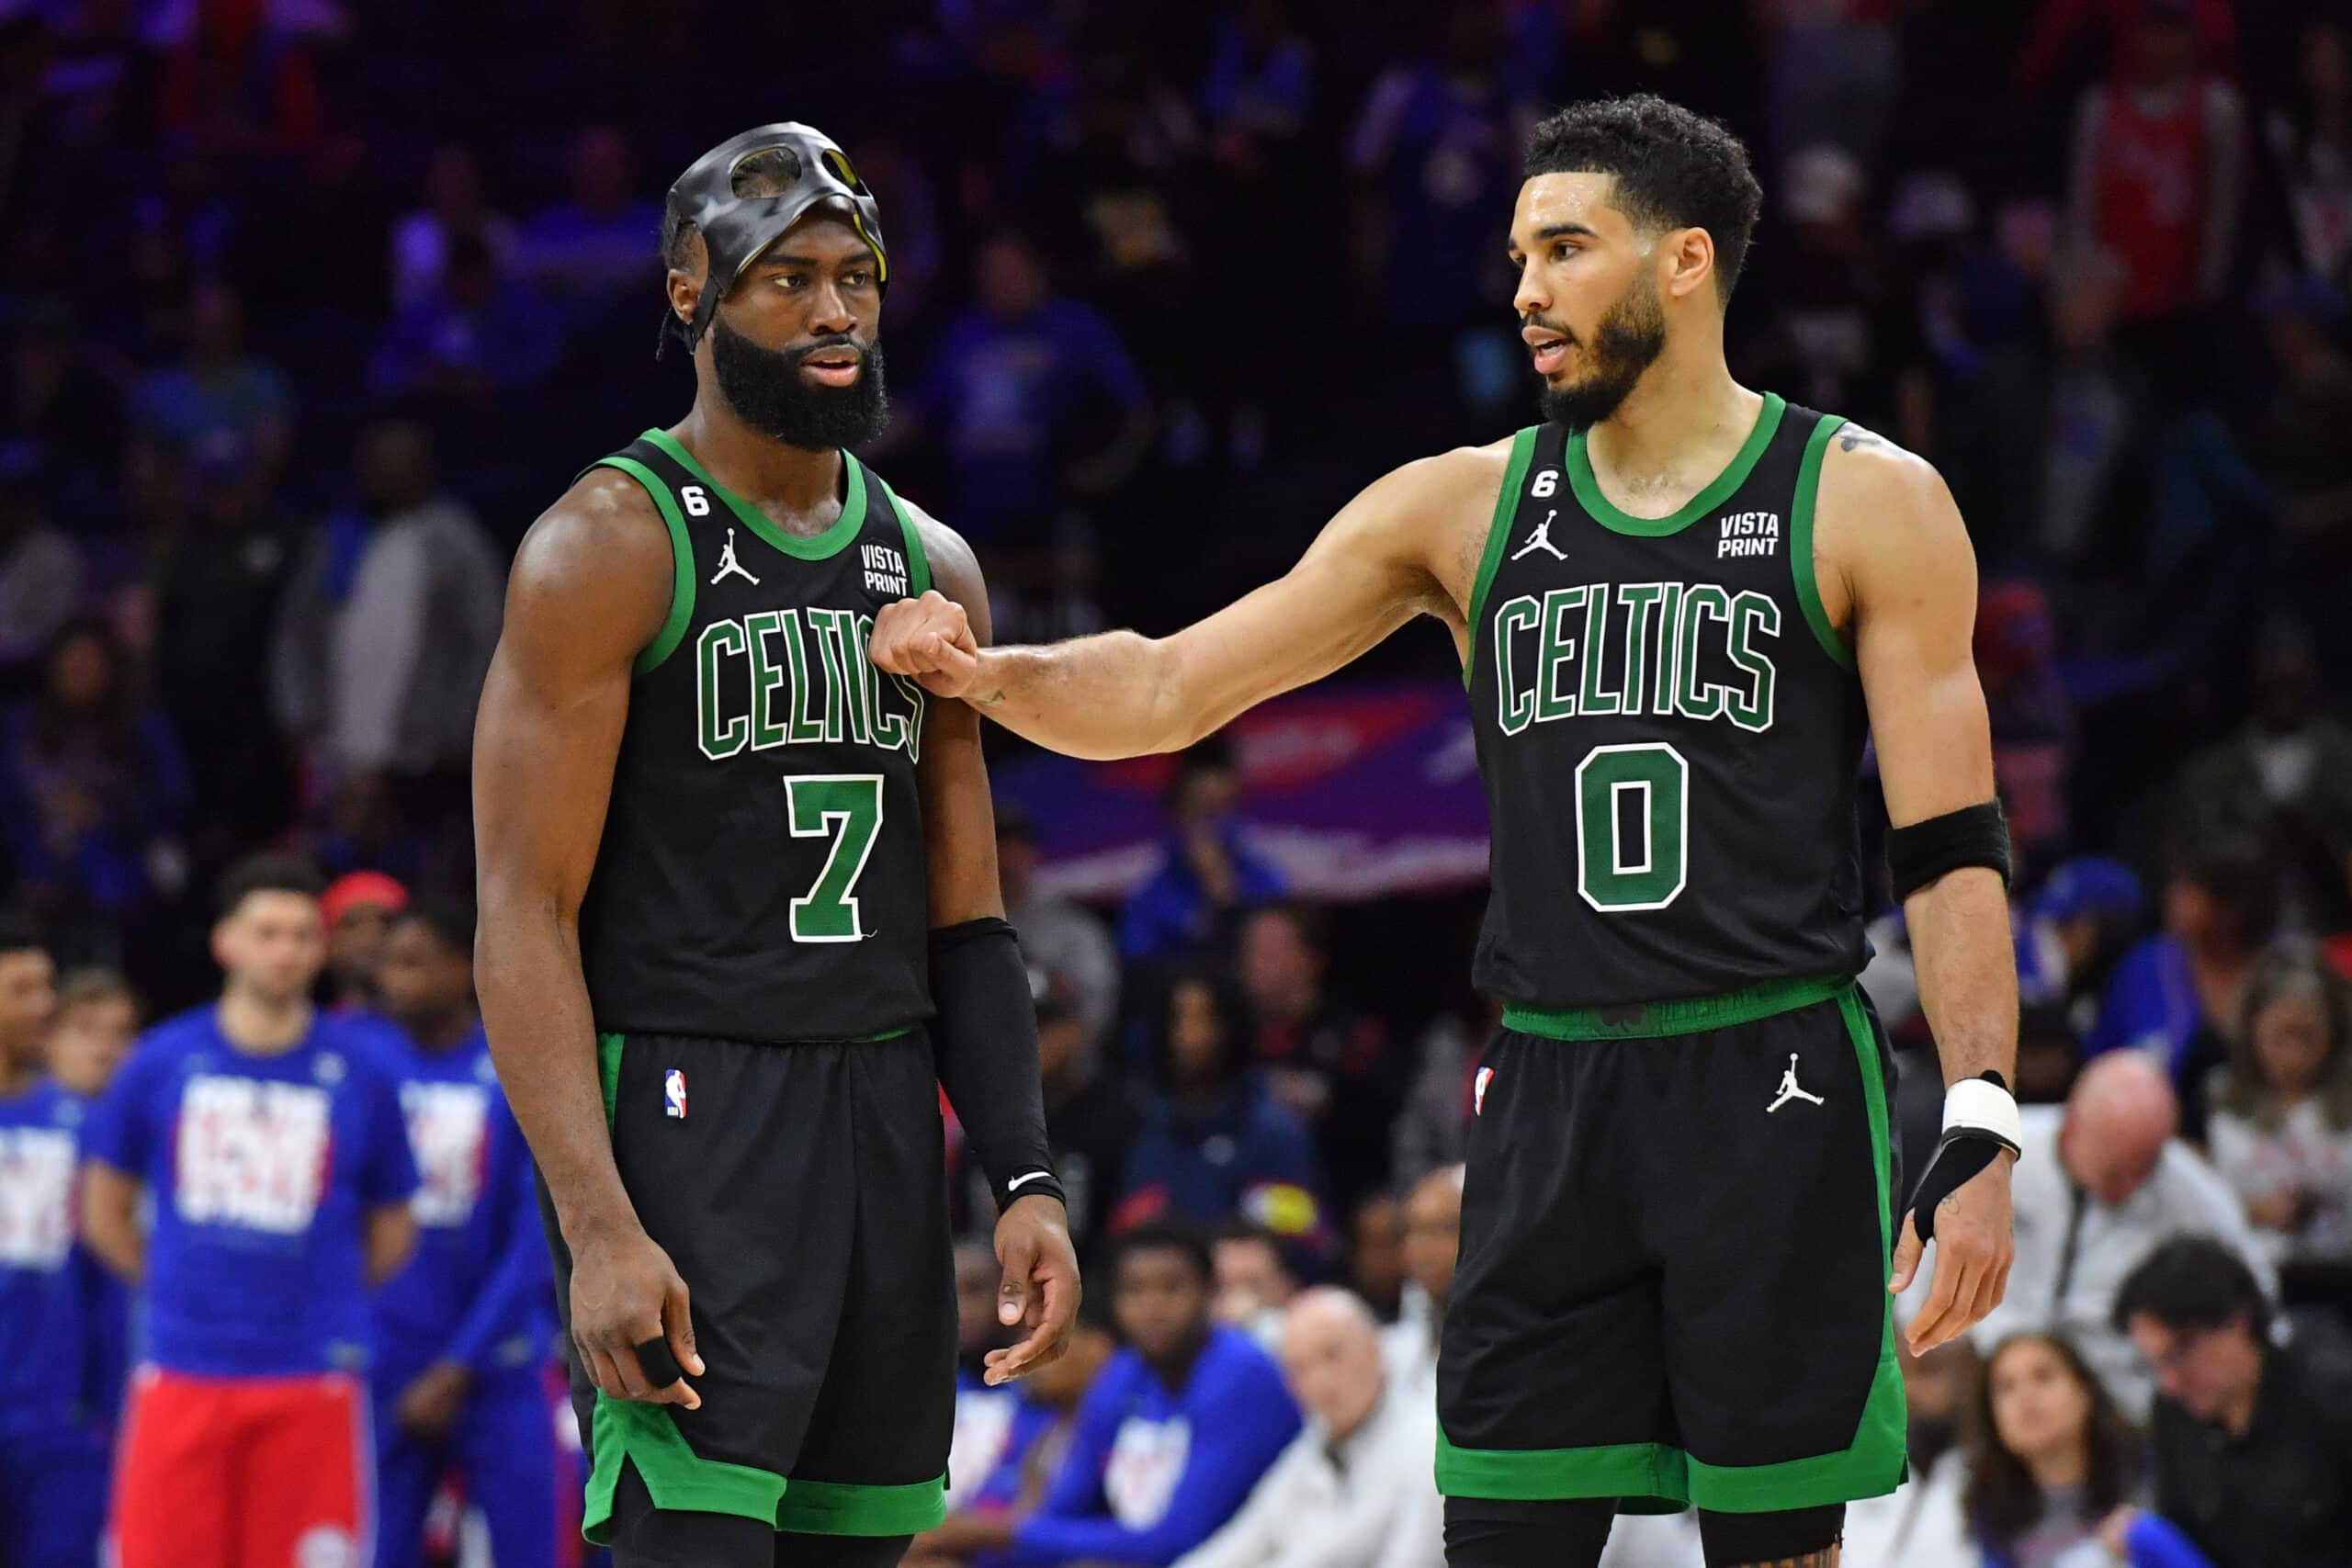 Jayson Tatum named to first All-NBA First Team over Joel Embiid